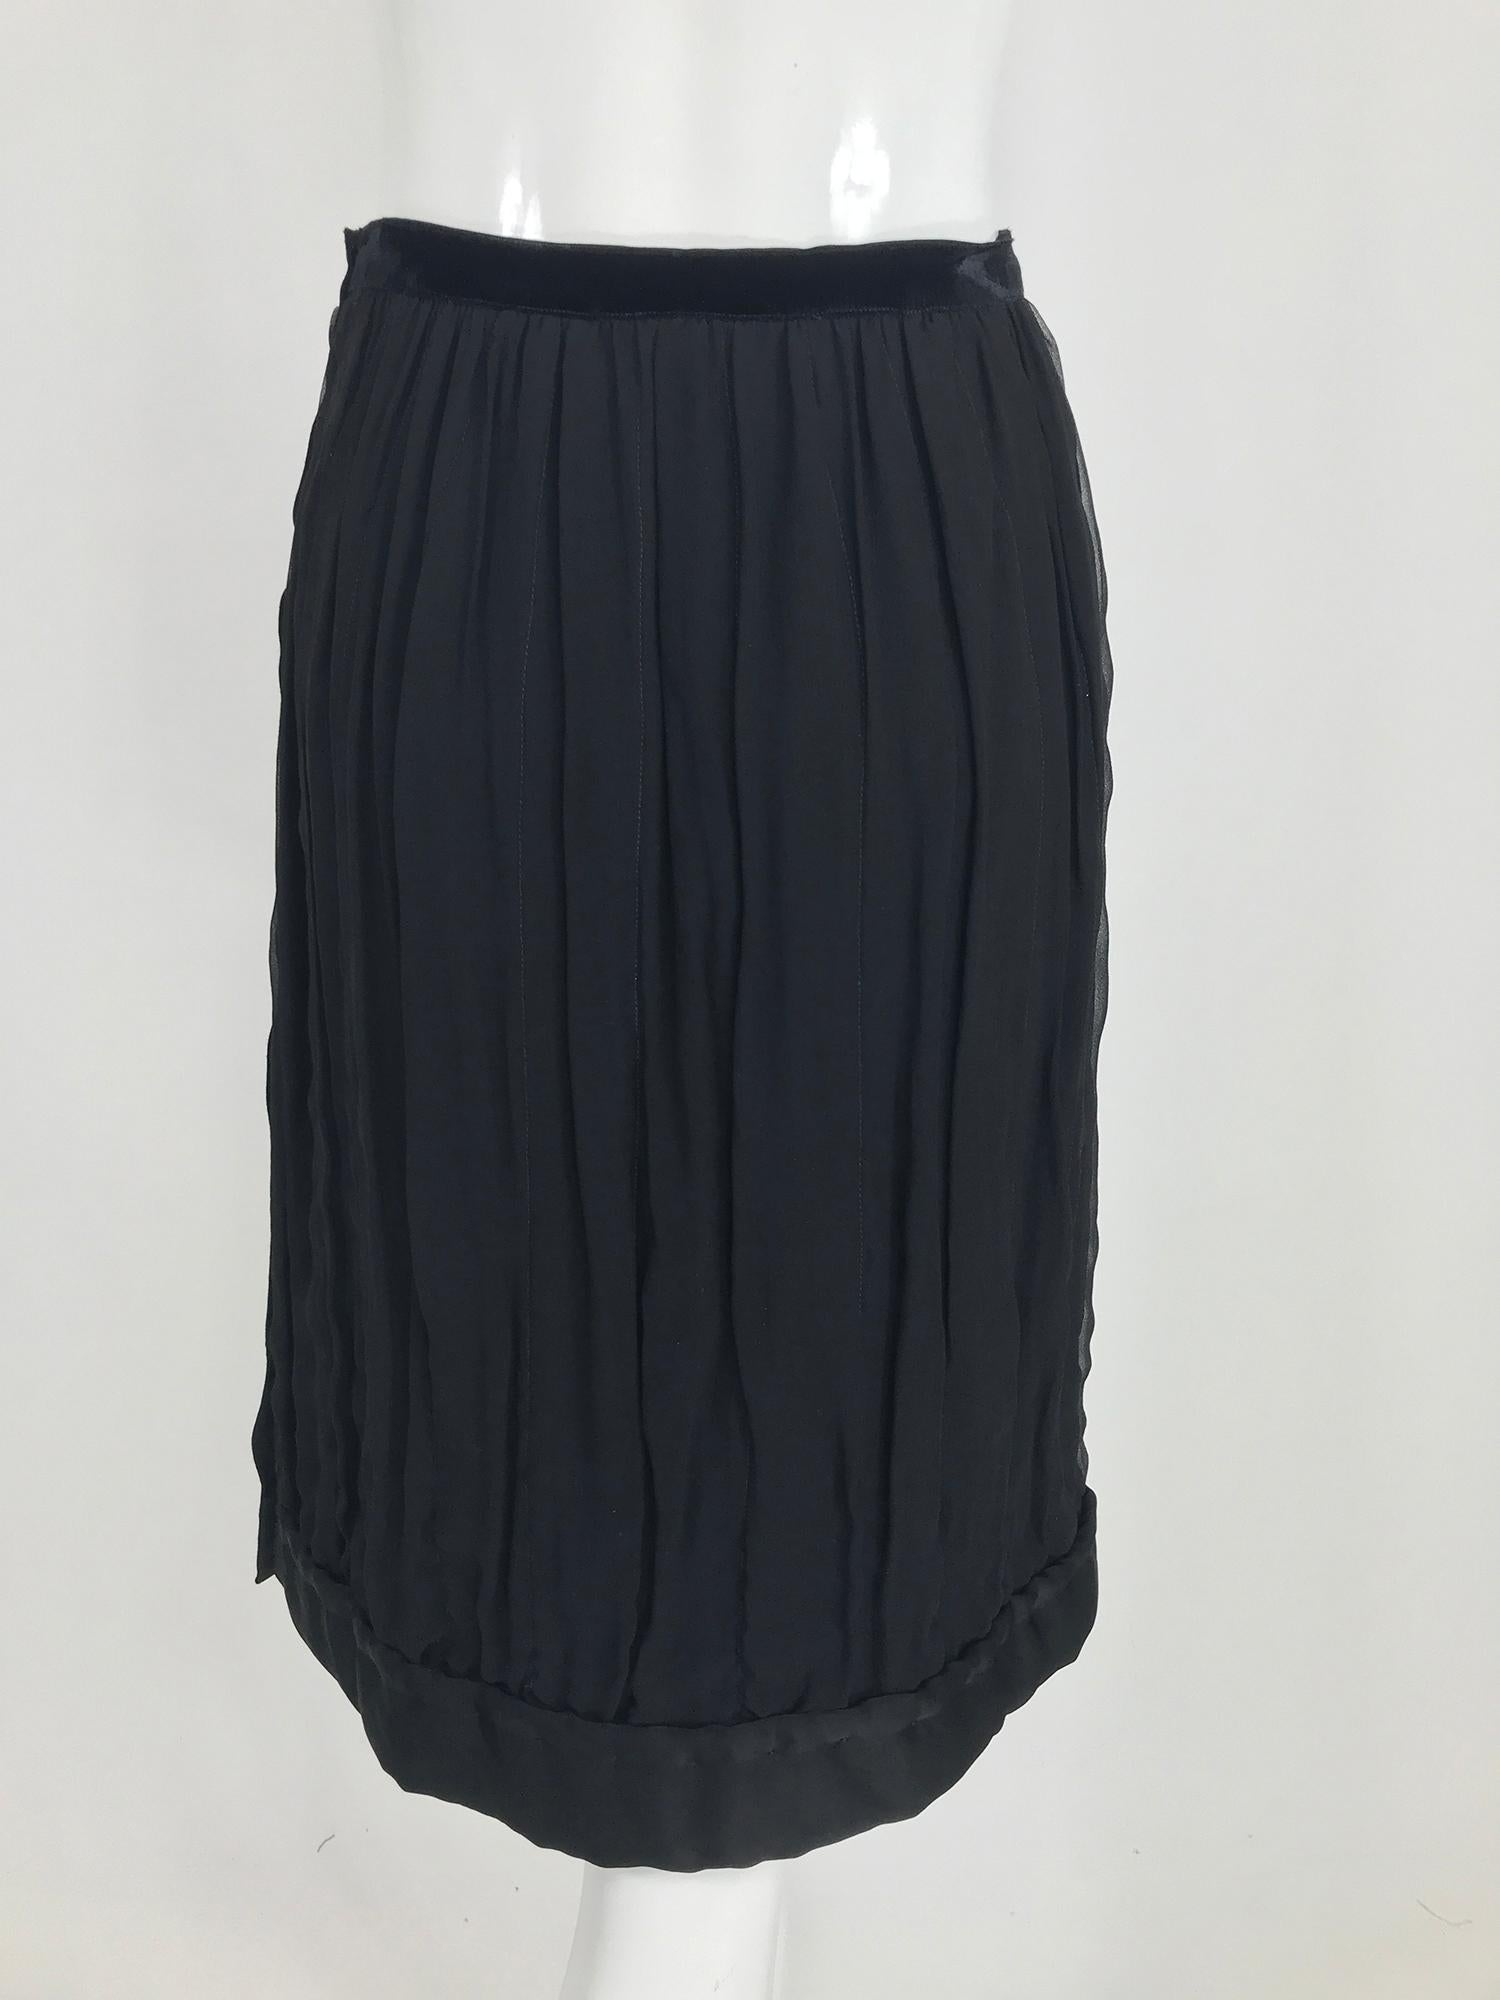 Lanvin Hiver 2006 Black Silk Skirt with Side Button Closure.  In Excellent Condition For Sale In West Palm Beach, FL